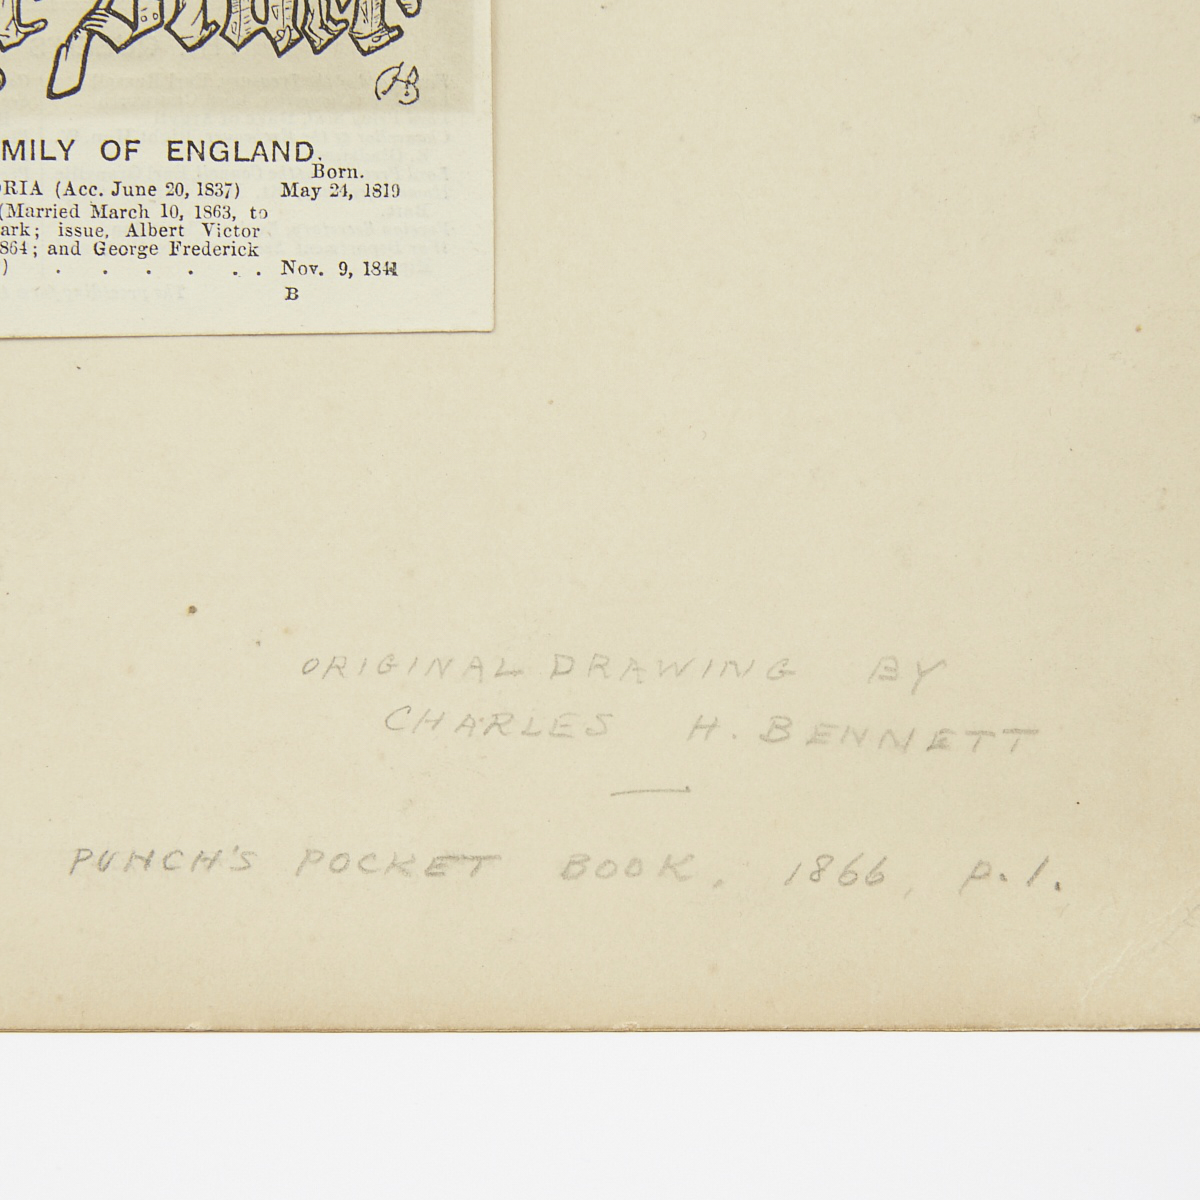 Charles H. Bennett Drawing and Print - Image 5 of 5